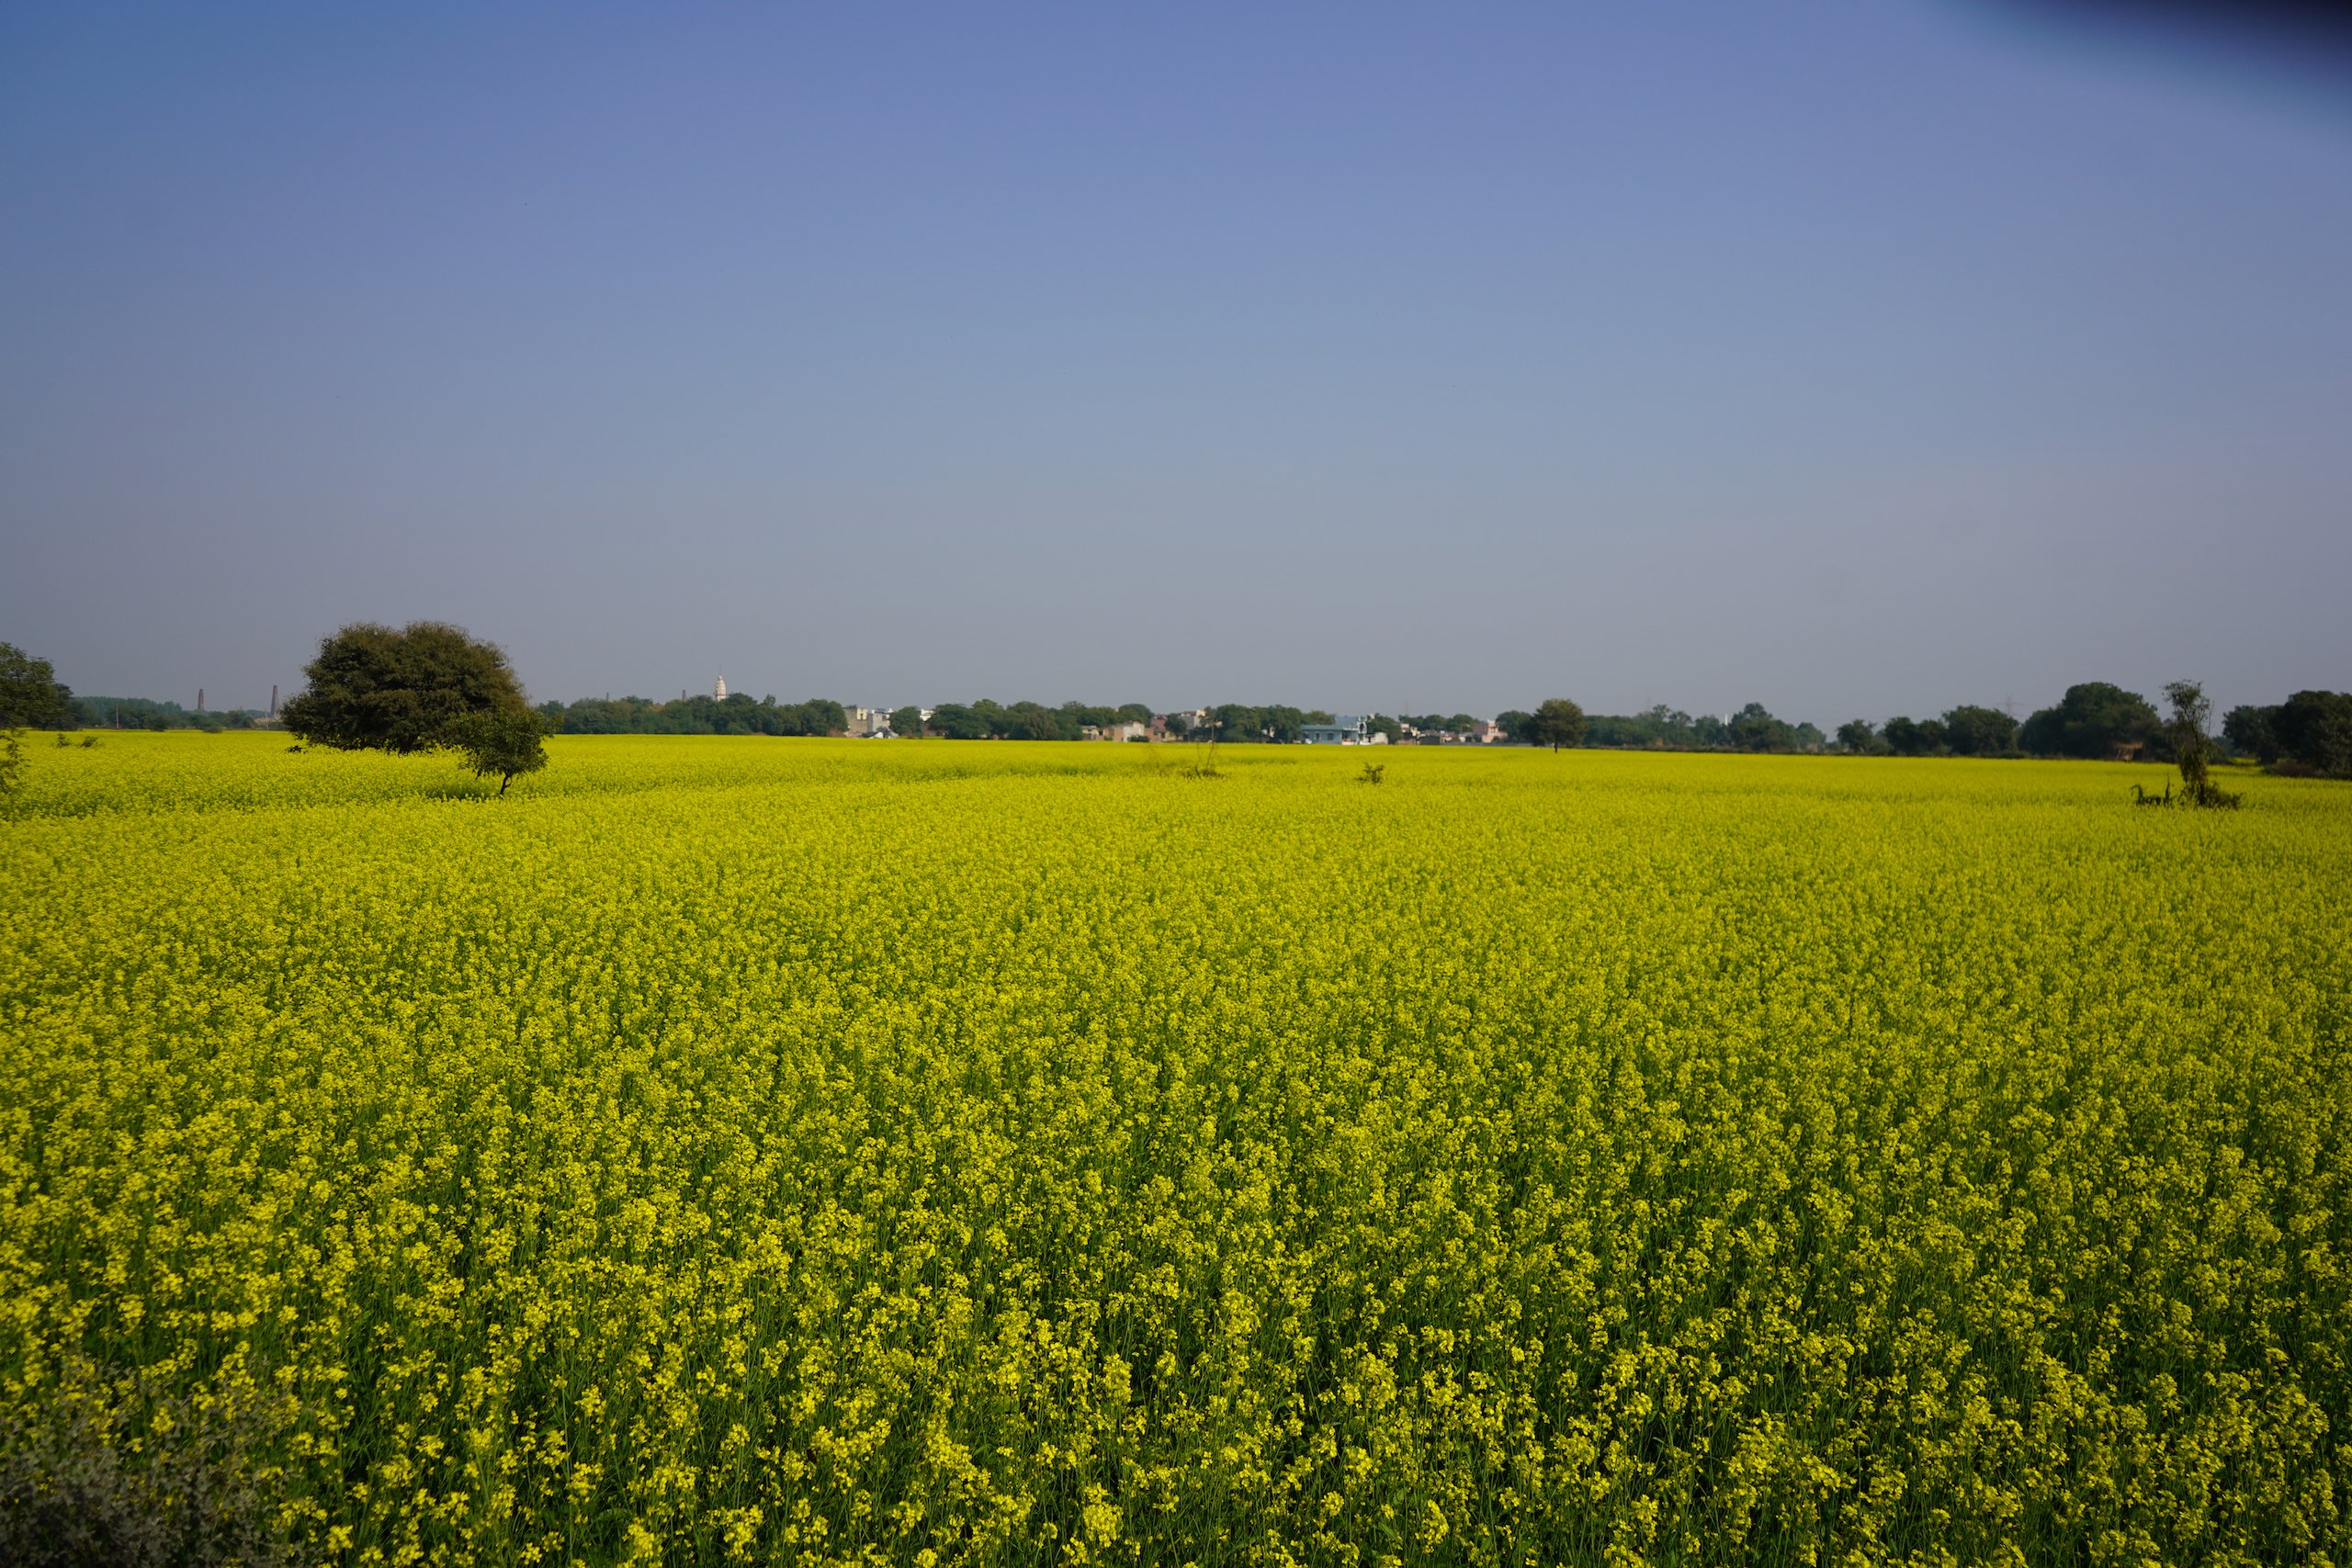 A field of crops with yellow flowers